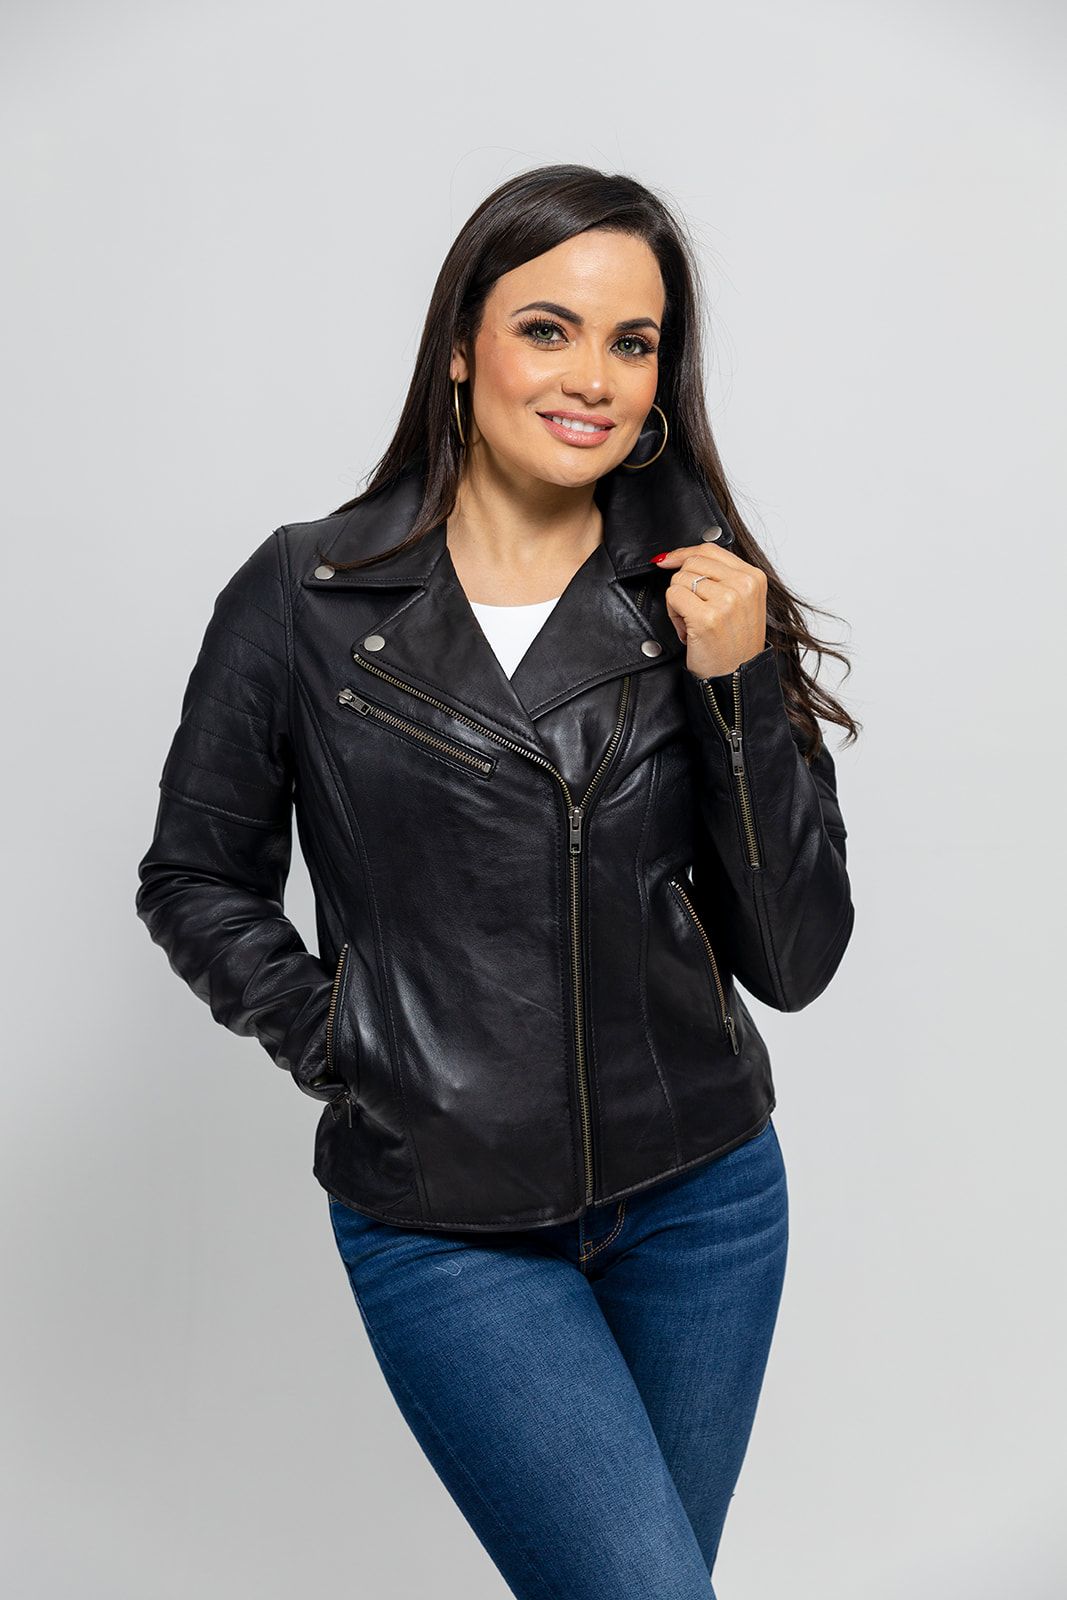 A classic rocker style jacket made from lambskin leather from Whet Blu.  Classic fit. Zip sleeves. Fully lined. One chest pocket. Two hand pockets. Lifetime Warranty on Hardware. Clean by leather specialist. Imported. Available in Black and Oxblood. Sizes XS-5X. Online Only, lifestyle picture of black jacket pictured